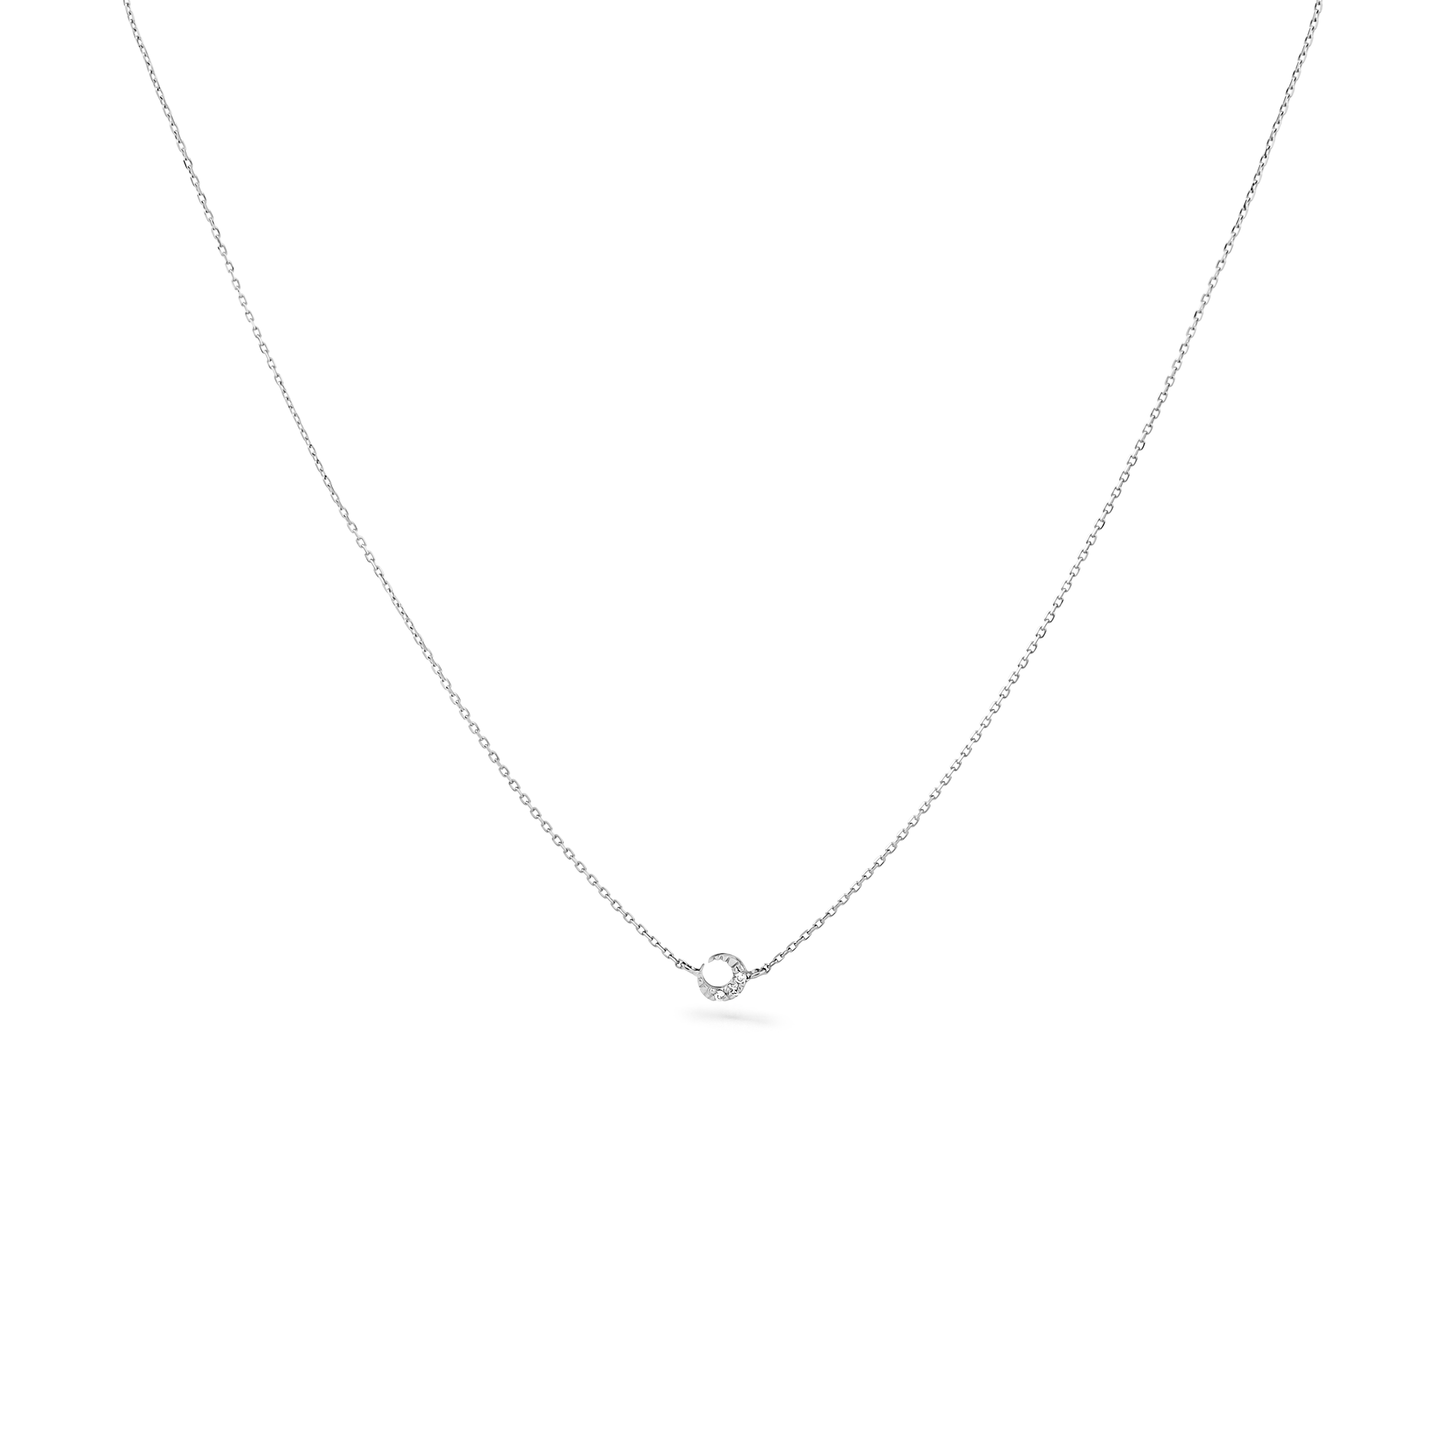 Oliver Heemeyer Mini Moon Diamond Necklace in 18k white gold. gold.